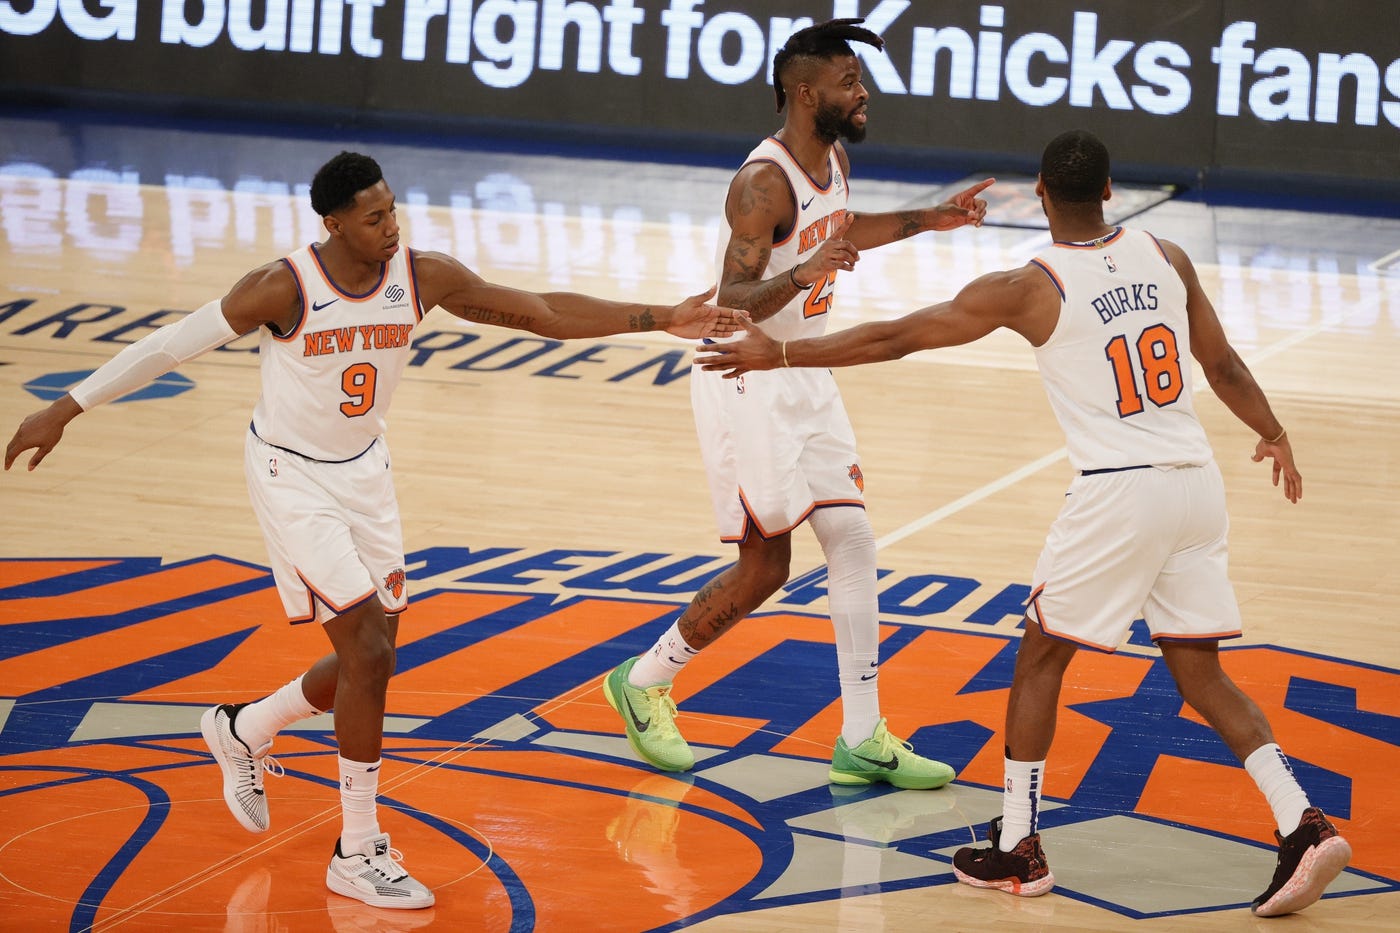 Feb 21, 2021; New York, New York, USA; RJ Barrett #9, Reggie Bullock #25, and Alec Burks #18 of the New York Knicks high-five during the second half against the Minnesota Timberwolves at Madison Square Garden on February 21, 2021 in New York City. The Knicks won 103-99.
